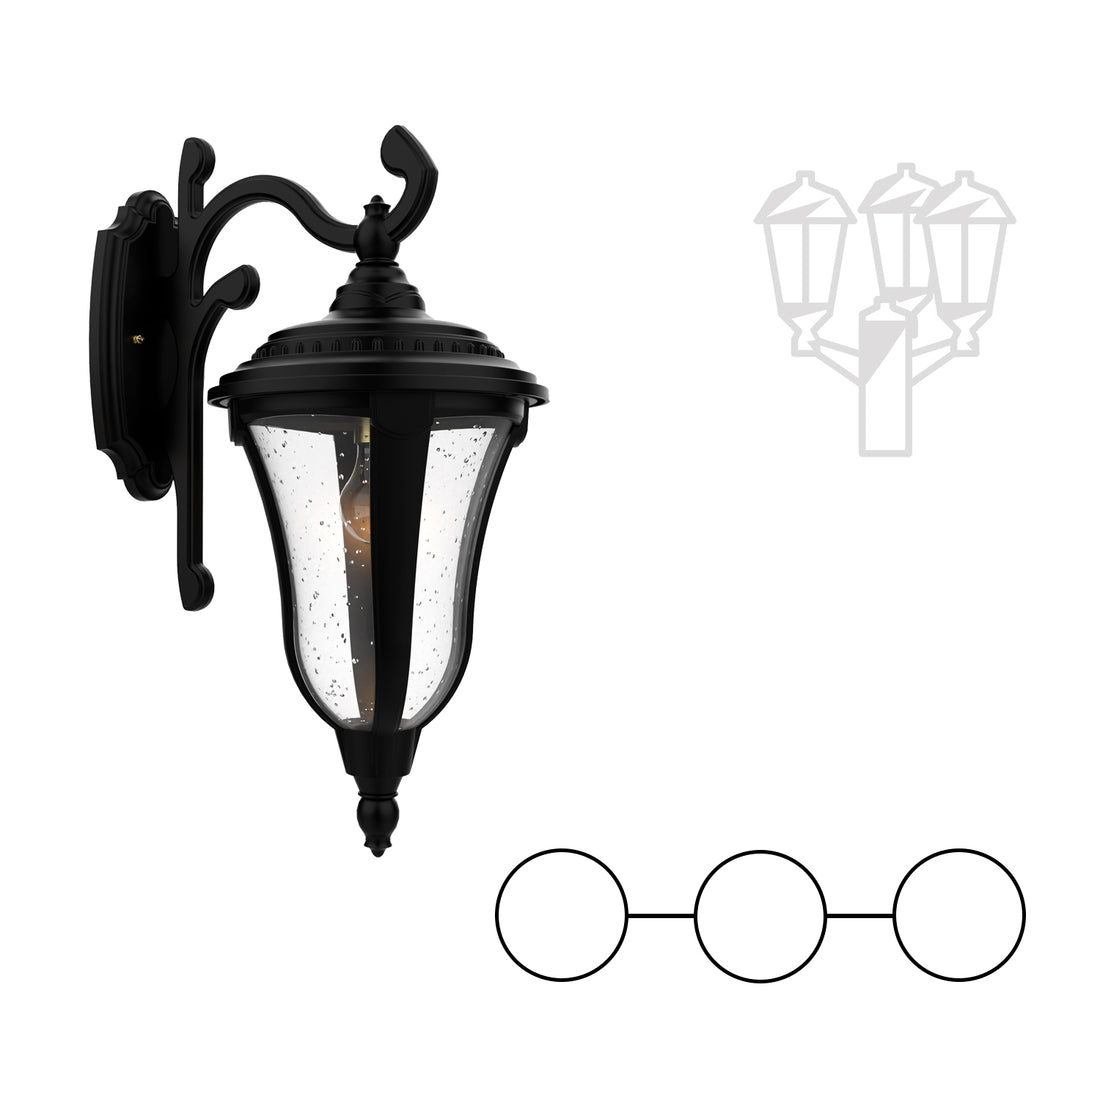 Munich - Double Head Mount and Center Head Decorative Arm Down Closed Bottom for Medium Post - 24283